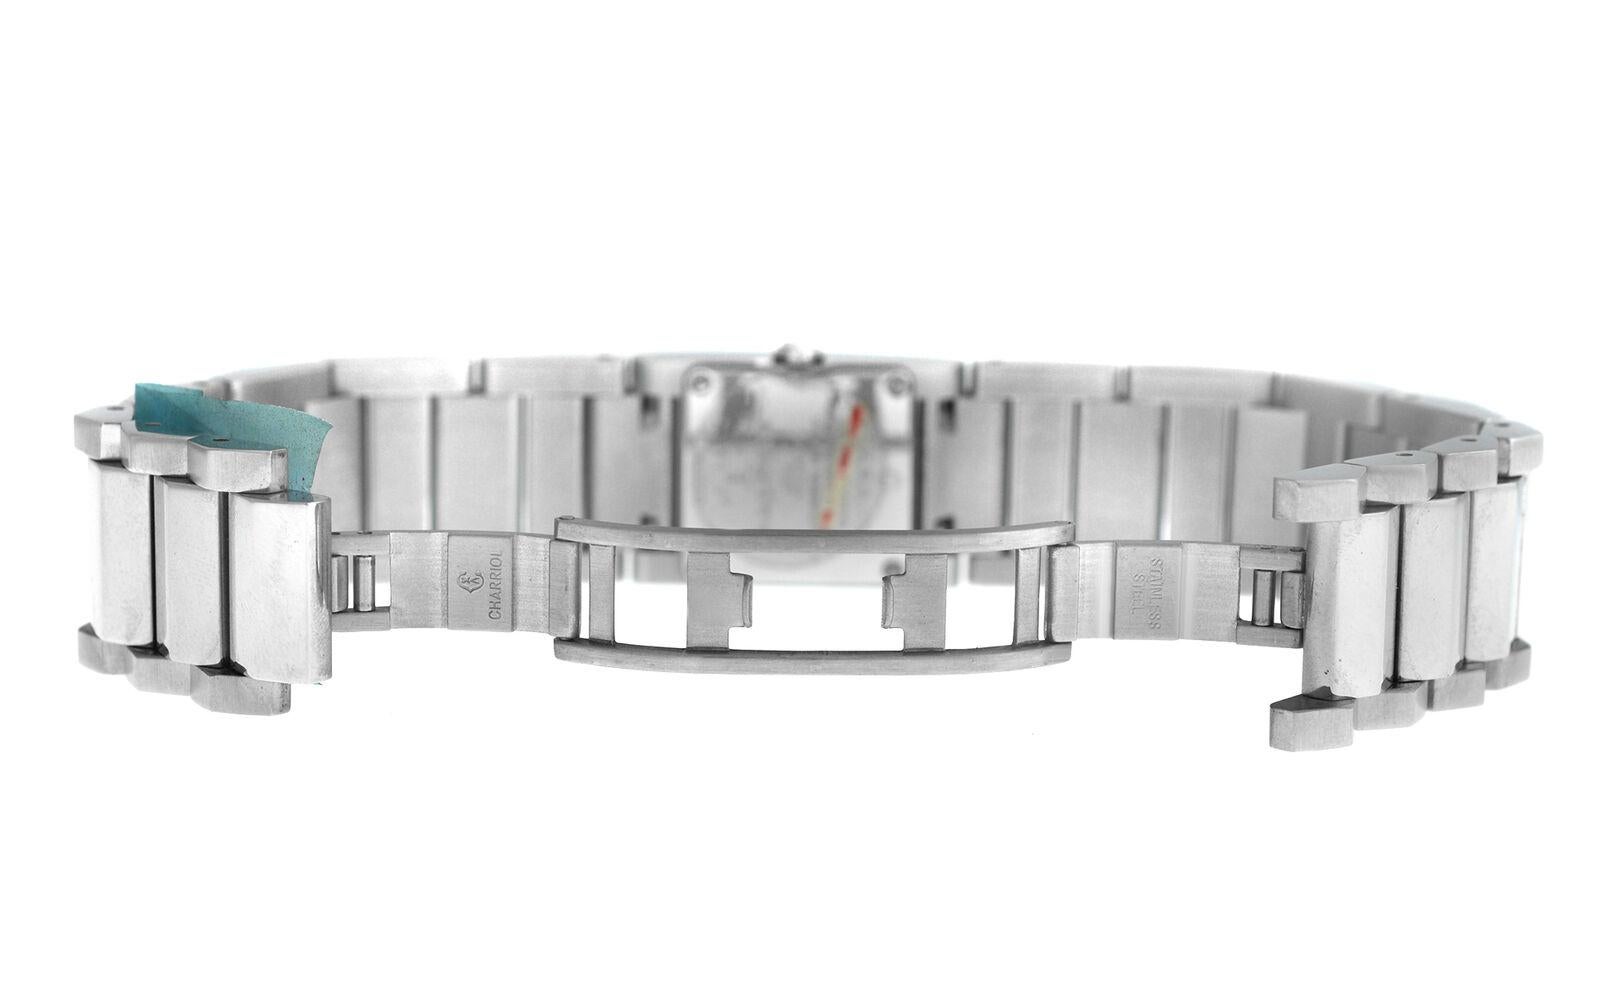 Brand	Charriol
Model	Megeve MGVSD
Gender	Ladies'
Condition	New store display
Movement	Swiss Quartz
Case Material	Stainless Steel
Bracelet / Strap Material	Stainless Steel
Clasp / Buckle Material	Stainless Steel
Clasp Type	Butterfly